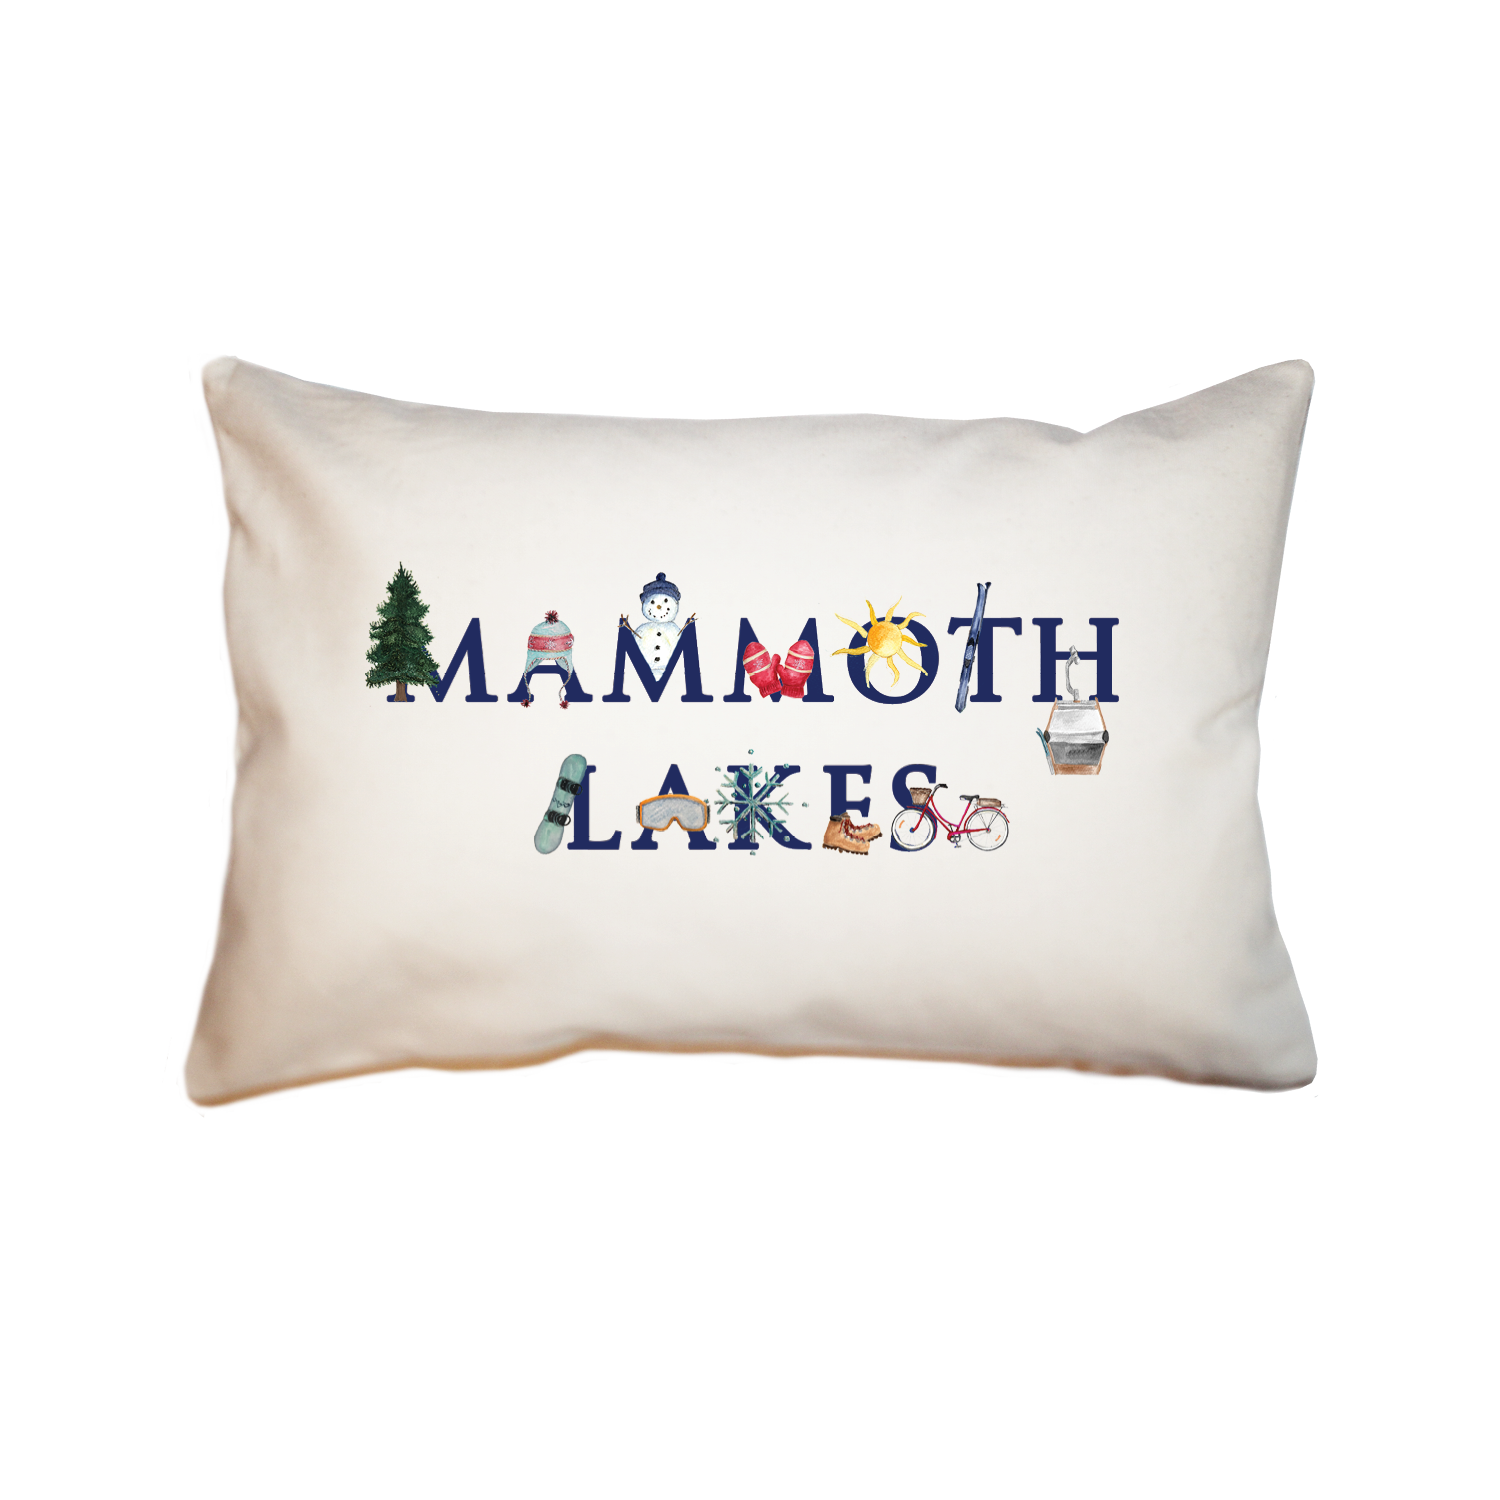 mammoth lakes large rectangle pillow